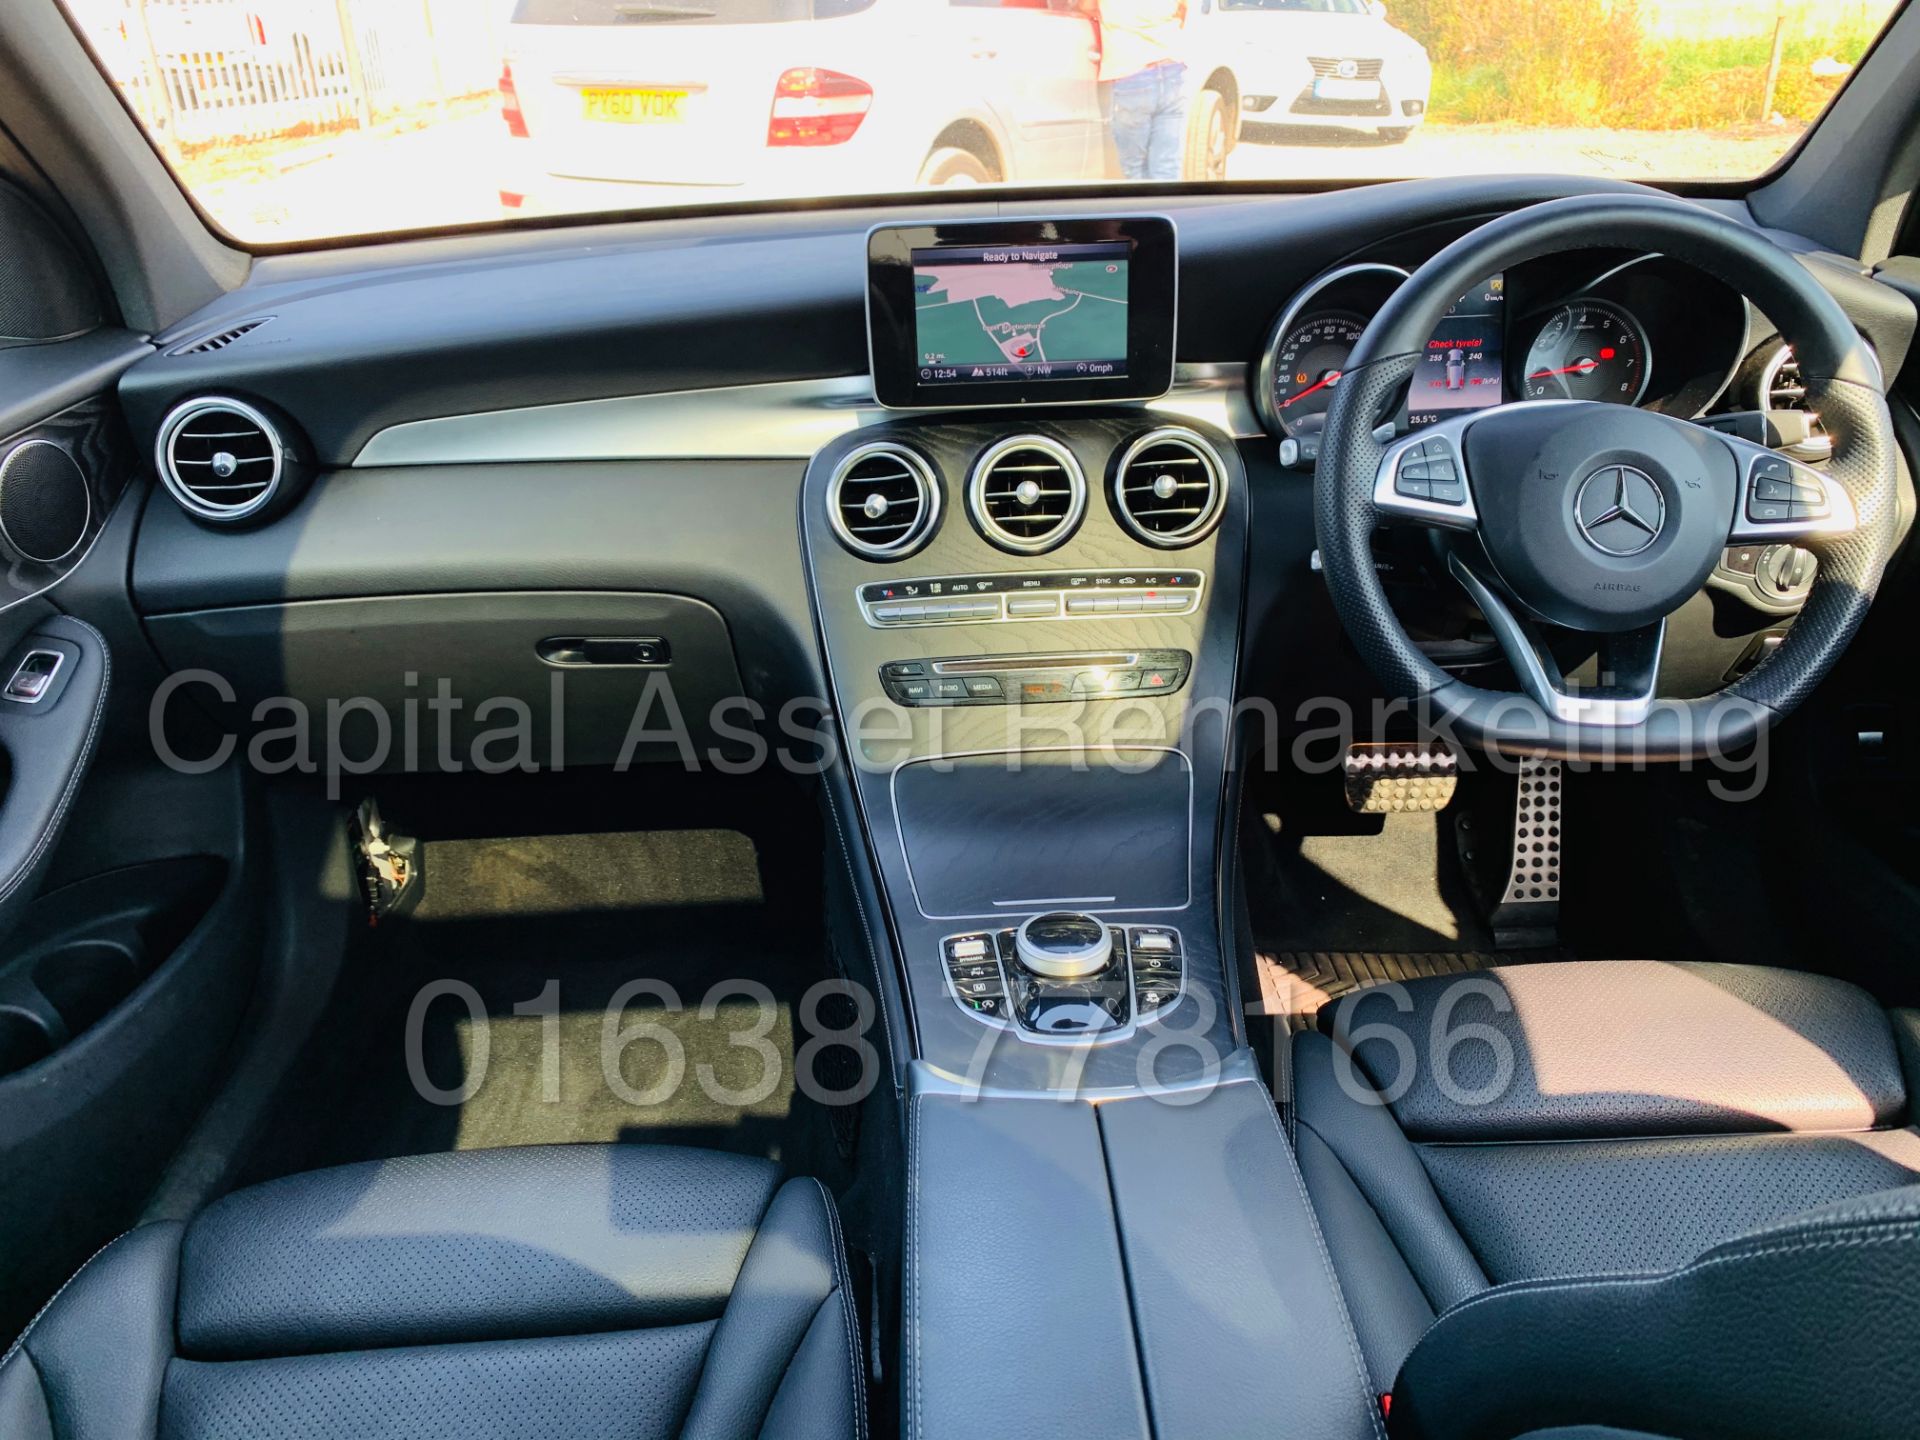 (On Sale) MERCEDES-BENZ GLC 250 *AMG - NIGHT EDITION* SUV (2019) '9G TRONIC - 4-MATIC' *HUGE SPEC* - Image 31 of 53